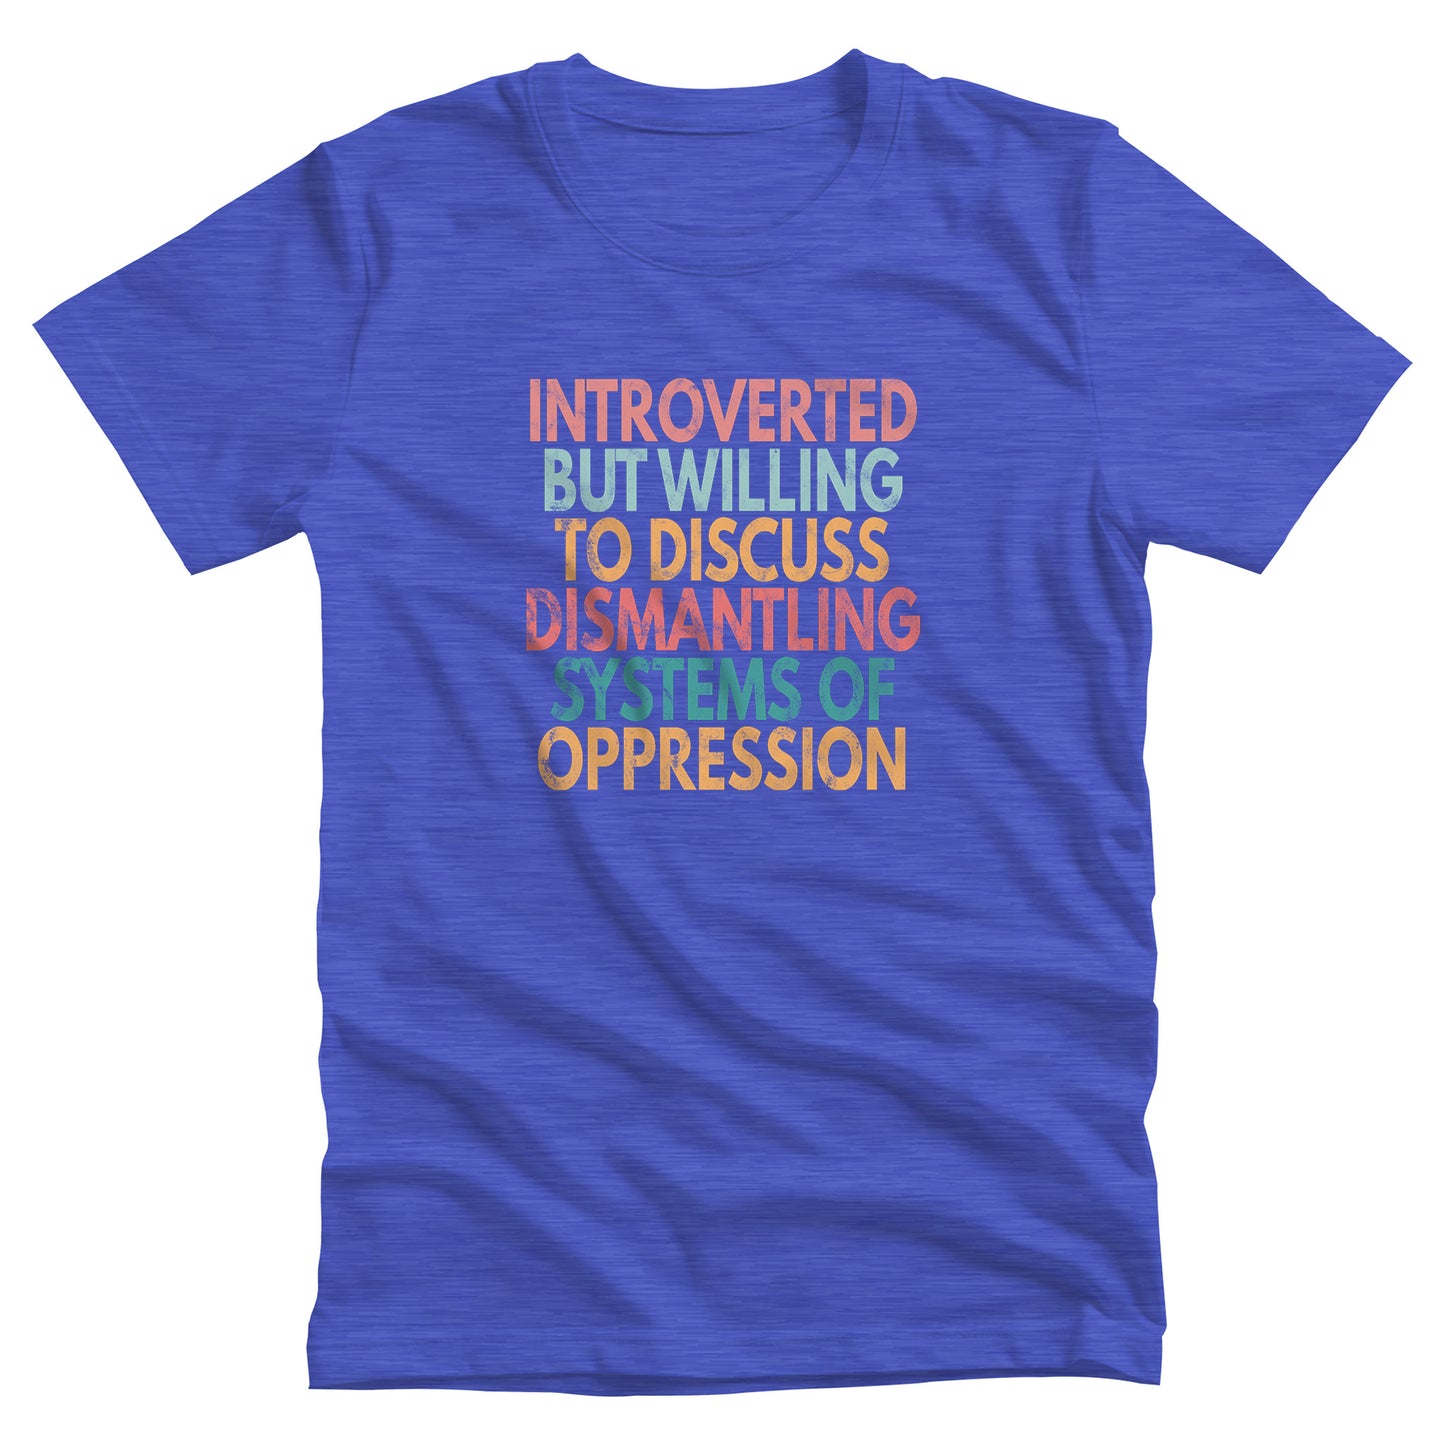 Heather True Royal color unisex t-shirt that says, “Introverted But Willing to Discuss Dismantling Systems of Oppression” spread out in 6 rows with each row a different color. “Introverted” is red/dark pink, “But Willing” is blue-green, “To Discuss” is yellow/orange, “Dismantling” is red/dark pink, “Systems of” is a dark blue-green, and “Oppression” is yellow/orange. The text has a slightly distressed look.